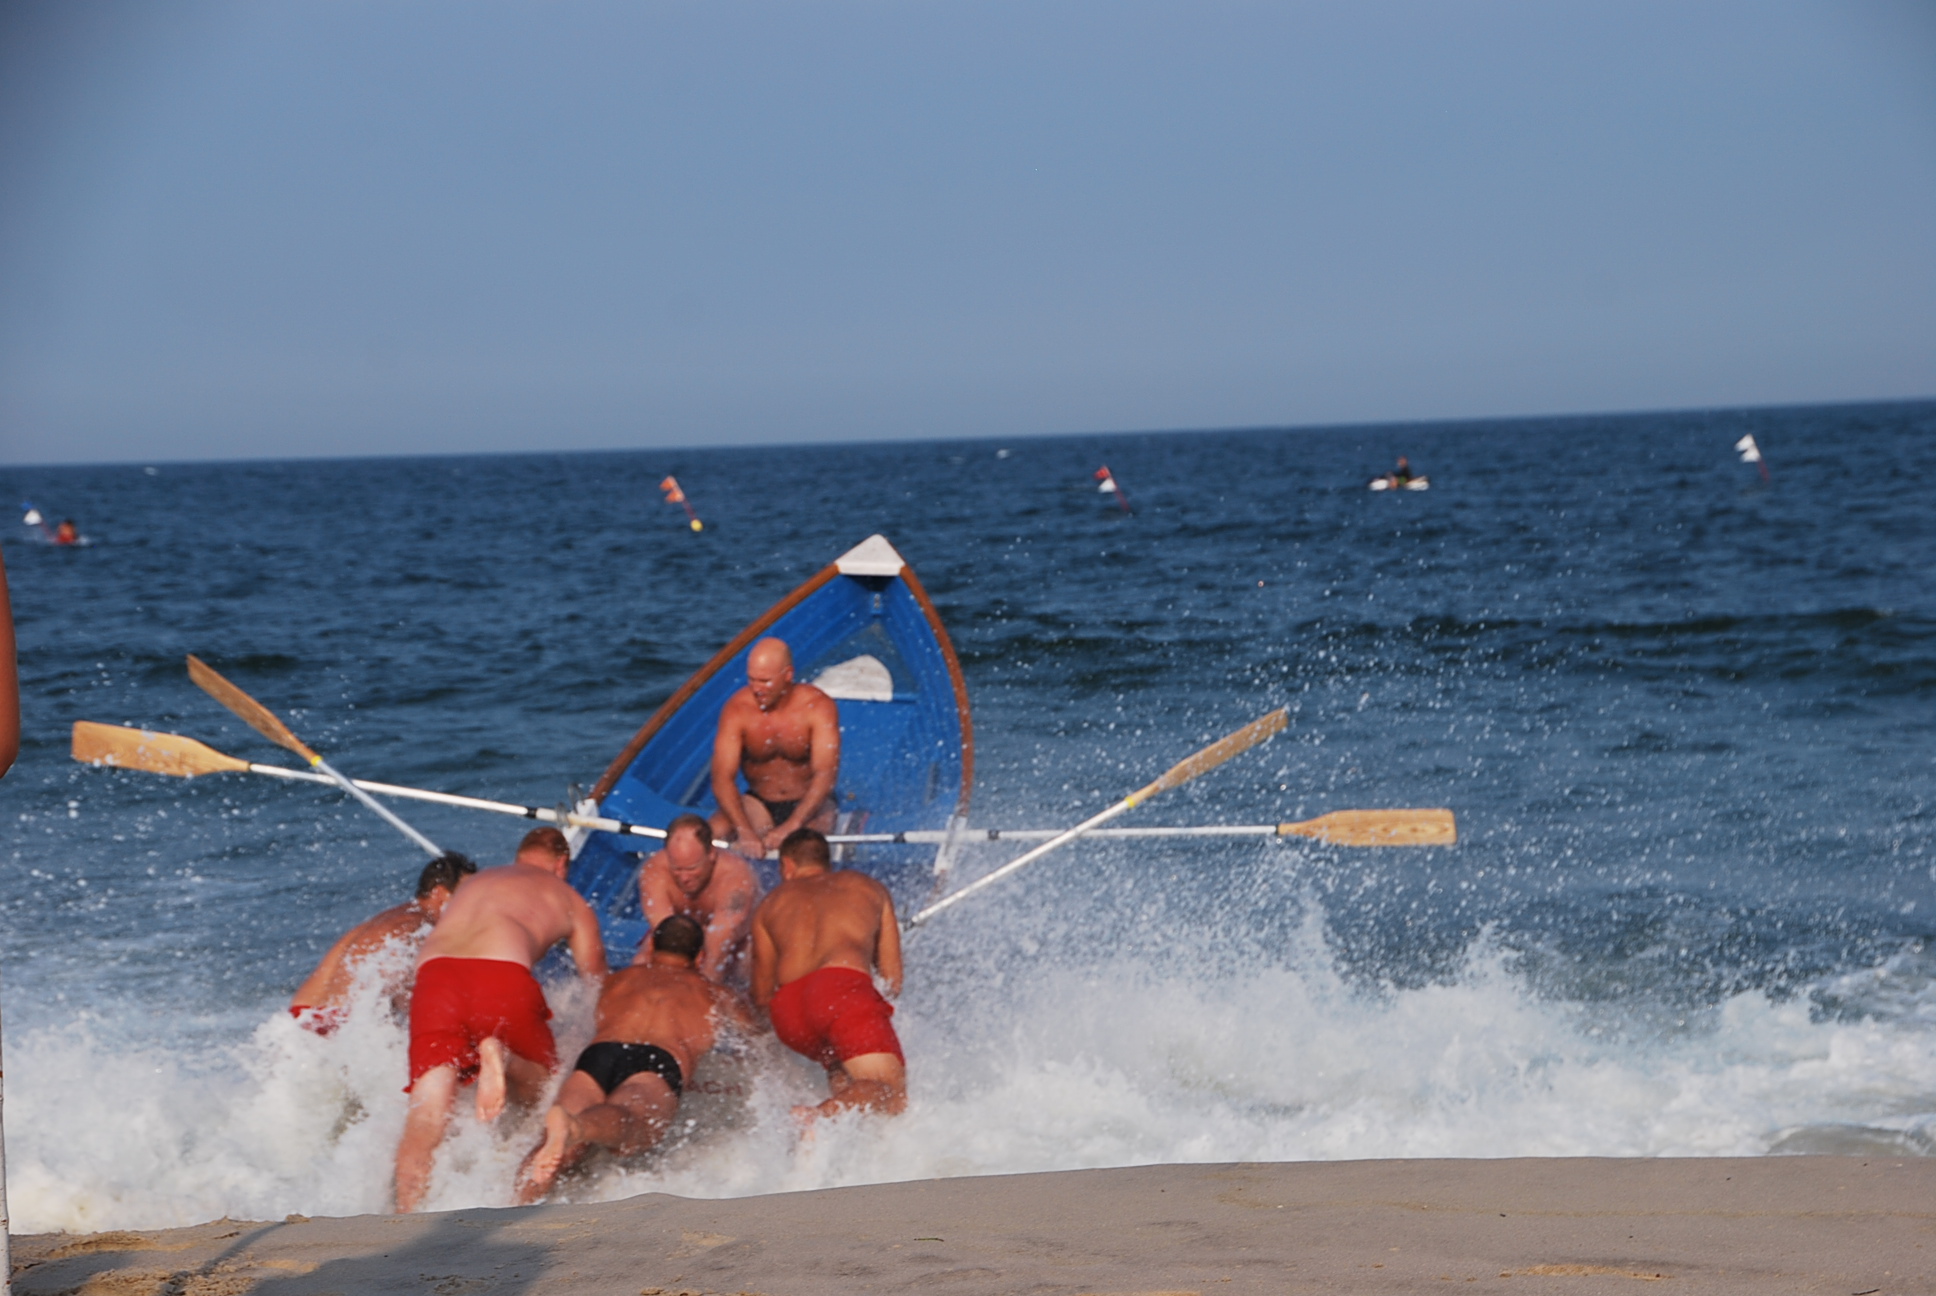 Ortley Beach lifeguards at the neighborhood's first tournament since Superstorm Sandy struck in 2012. (Photo: Toms River Twp.)